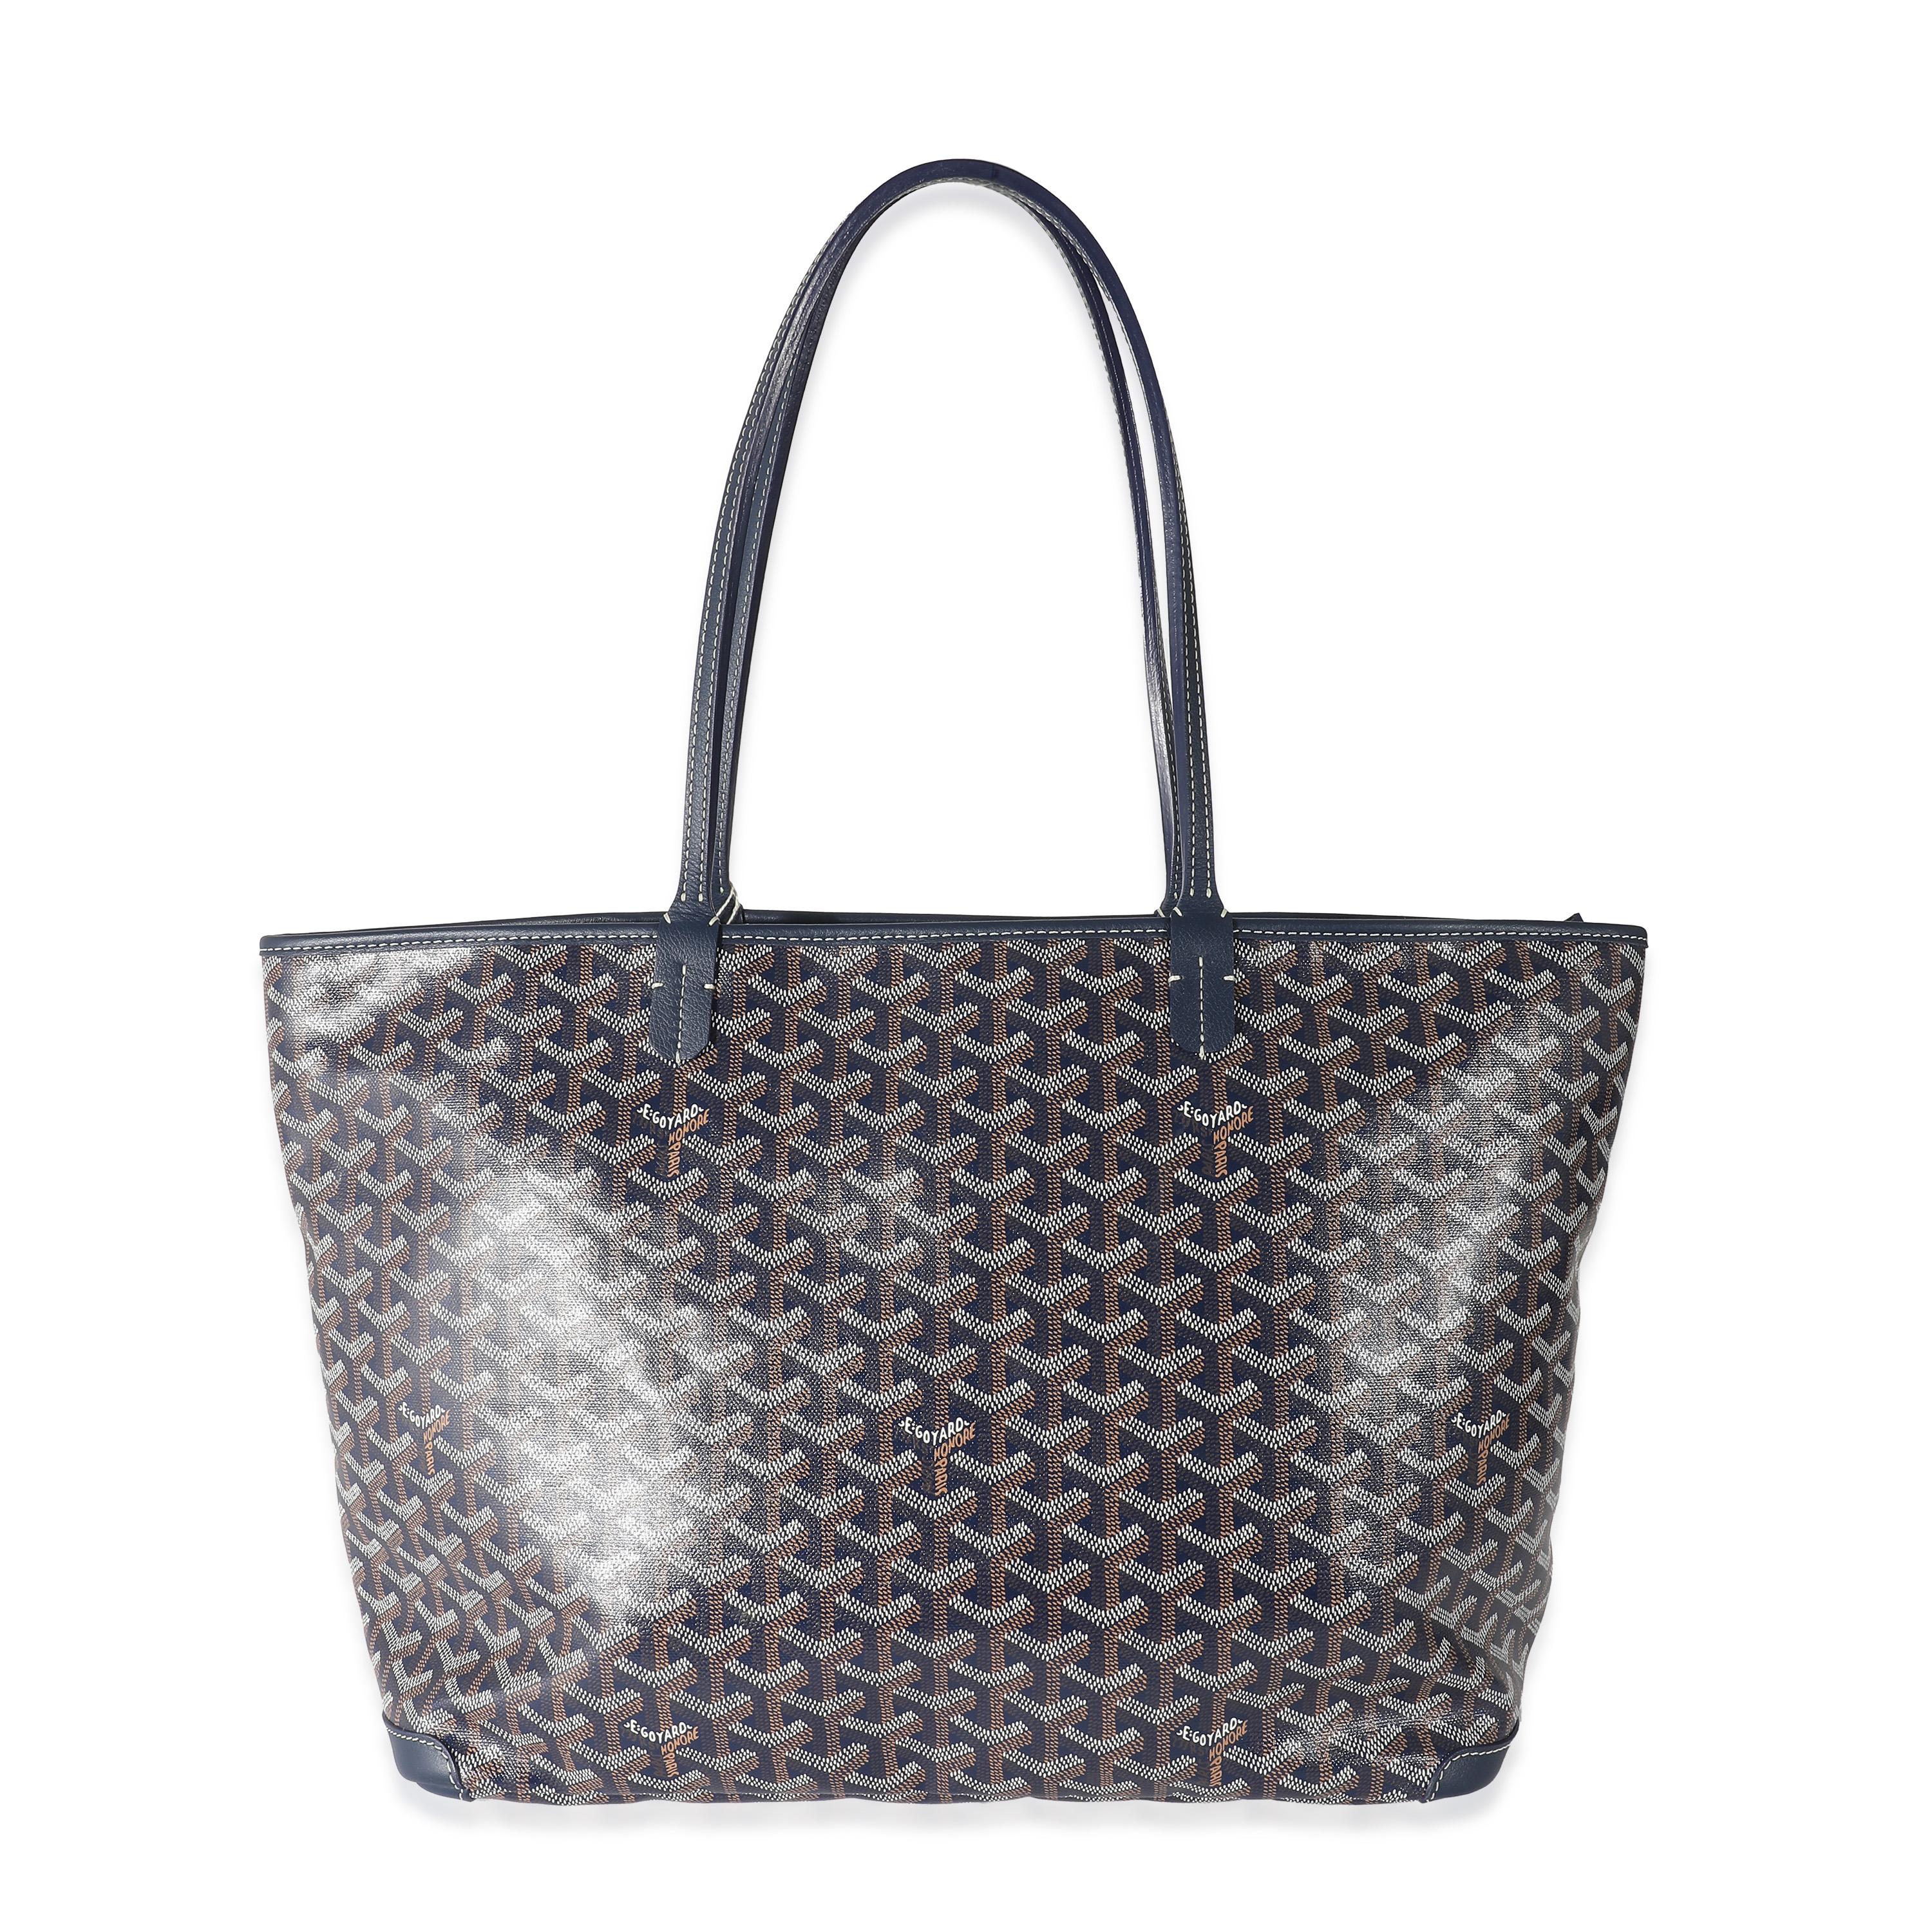 Listing Title: Goyard Navy Goyardine Artois MM
SKU: 134385
Condition: Pre-owned 
Handbag Condition: Excellent
Condition Comments: Item is in excellent condition and displays light signs of wear. Exterior scuffing to corners and along lining. Slight